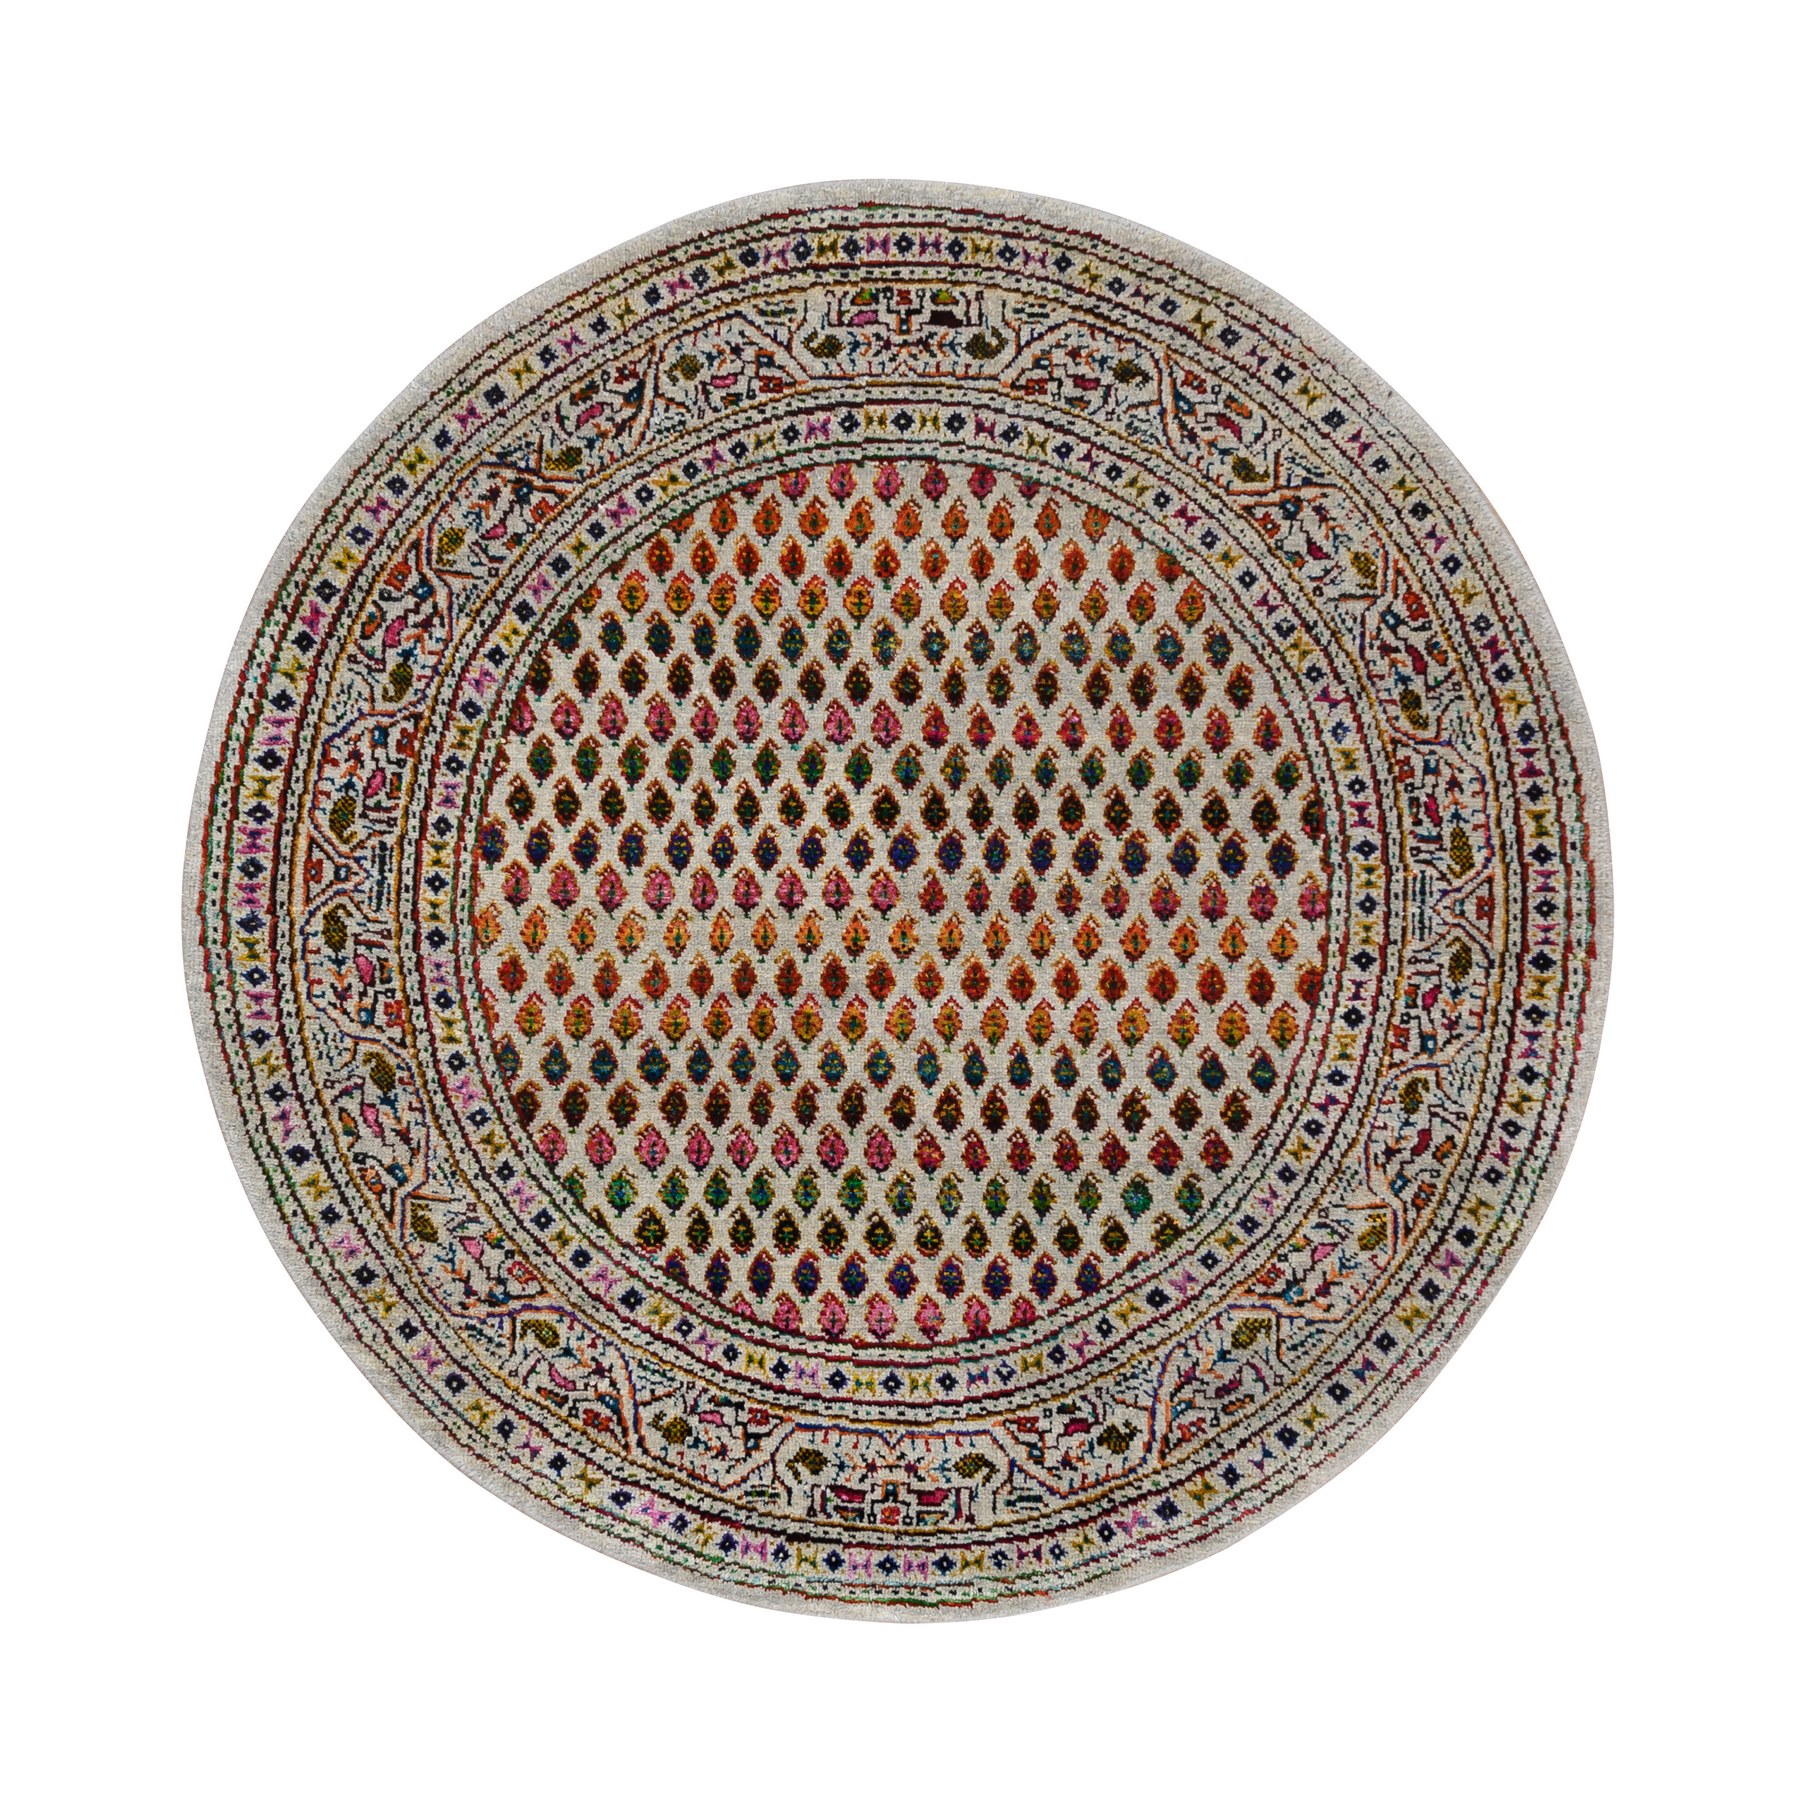 3'10"x3'10" Sarouk Mir Inspired With Repetitive Boteh Design Colorful Wool And Sari Silk Hand Woven Beige Oriental Round Rug 